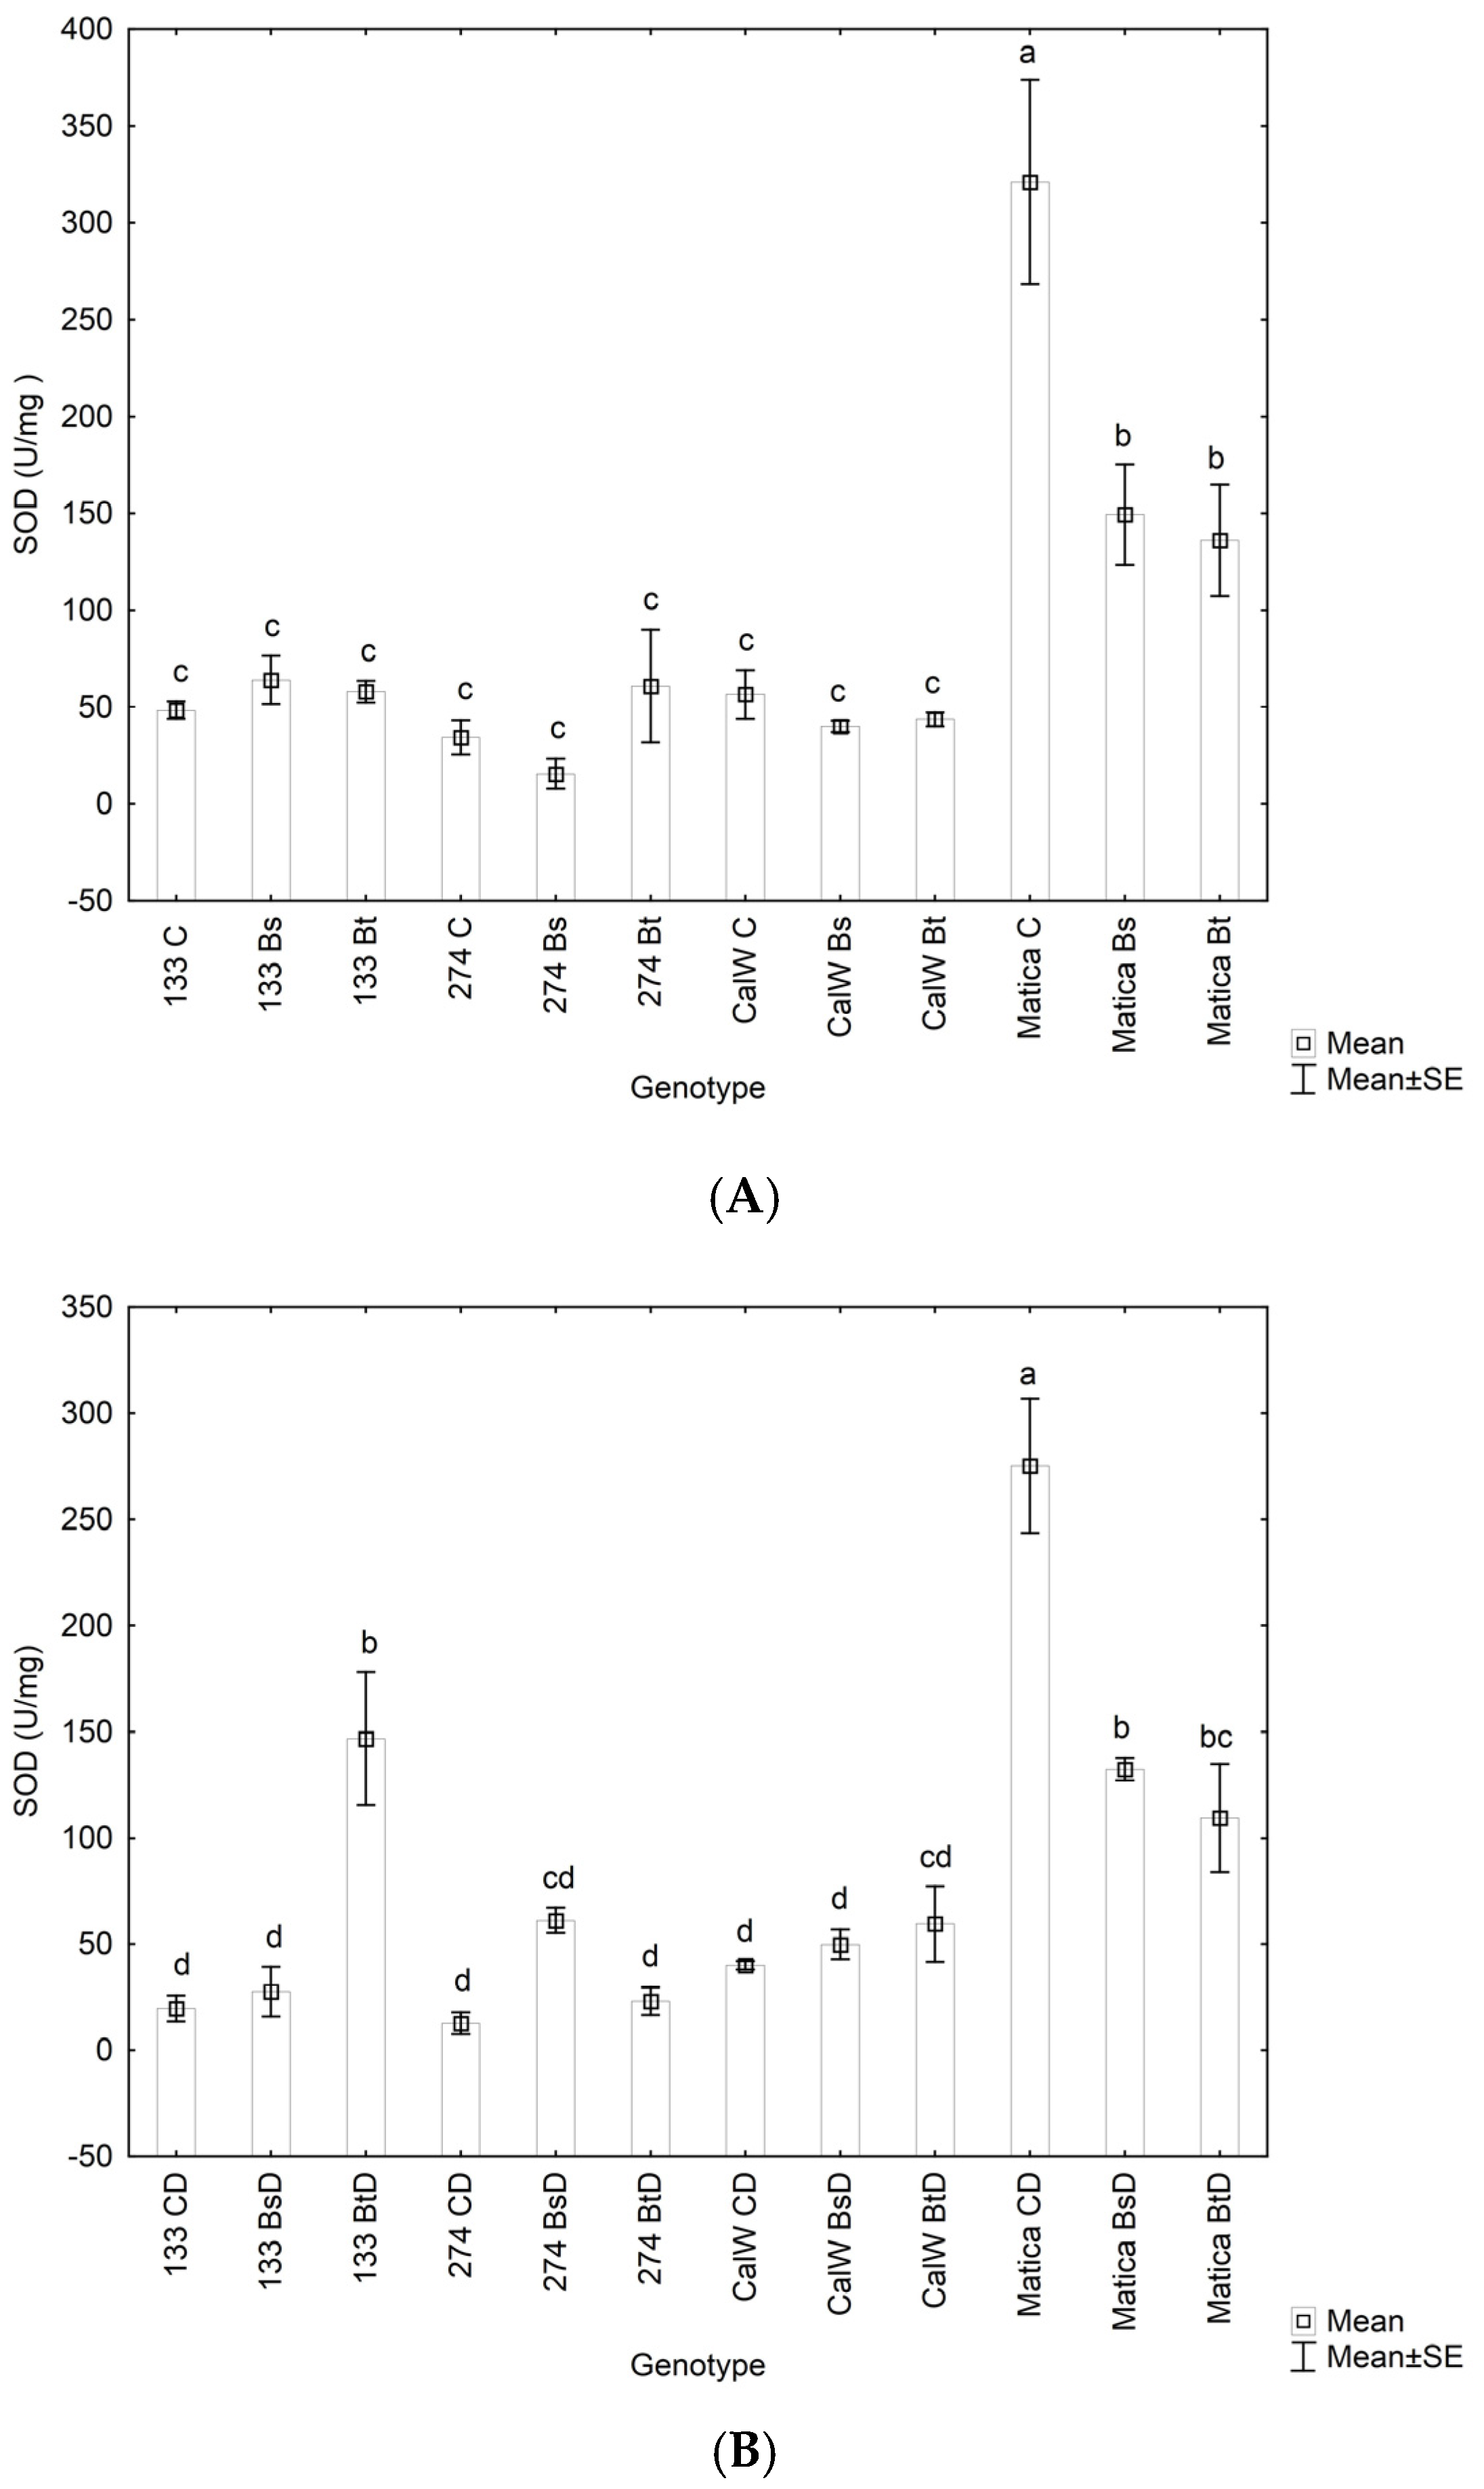 Horticulturae | Free Full-Text | Genotype-Dependent Antioxidative Response  of Four Sweet Pepper Cultivars to Water Deficiency as Affected by  Drought-Tolerant Bacillus safensis SS-2.7 and Bacillus thuringiensis  SS-29.2 Strains